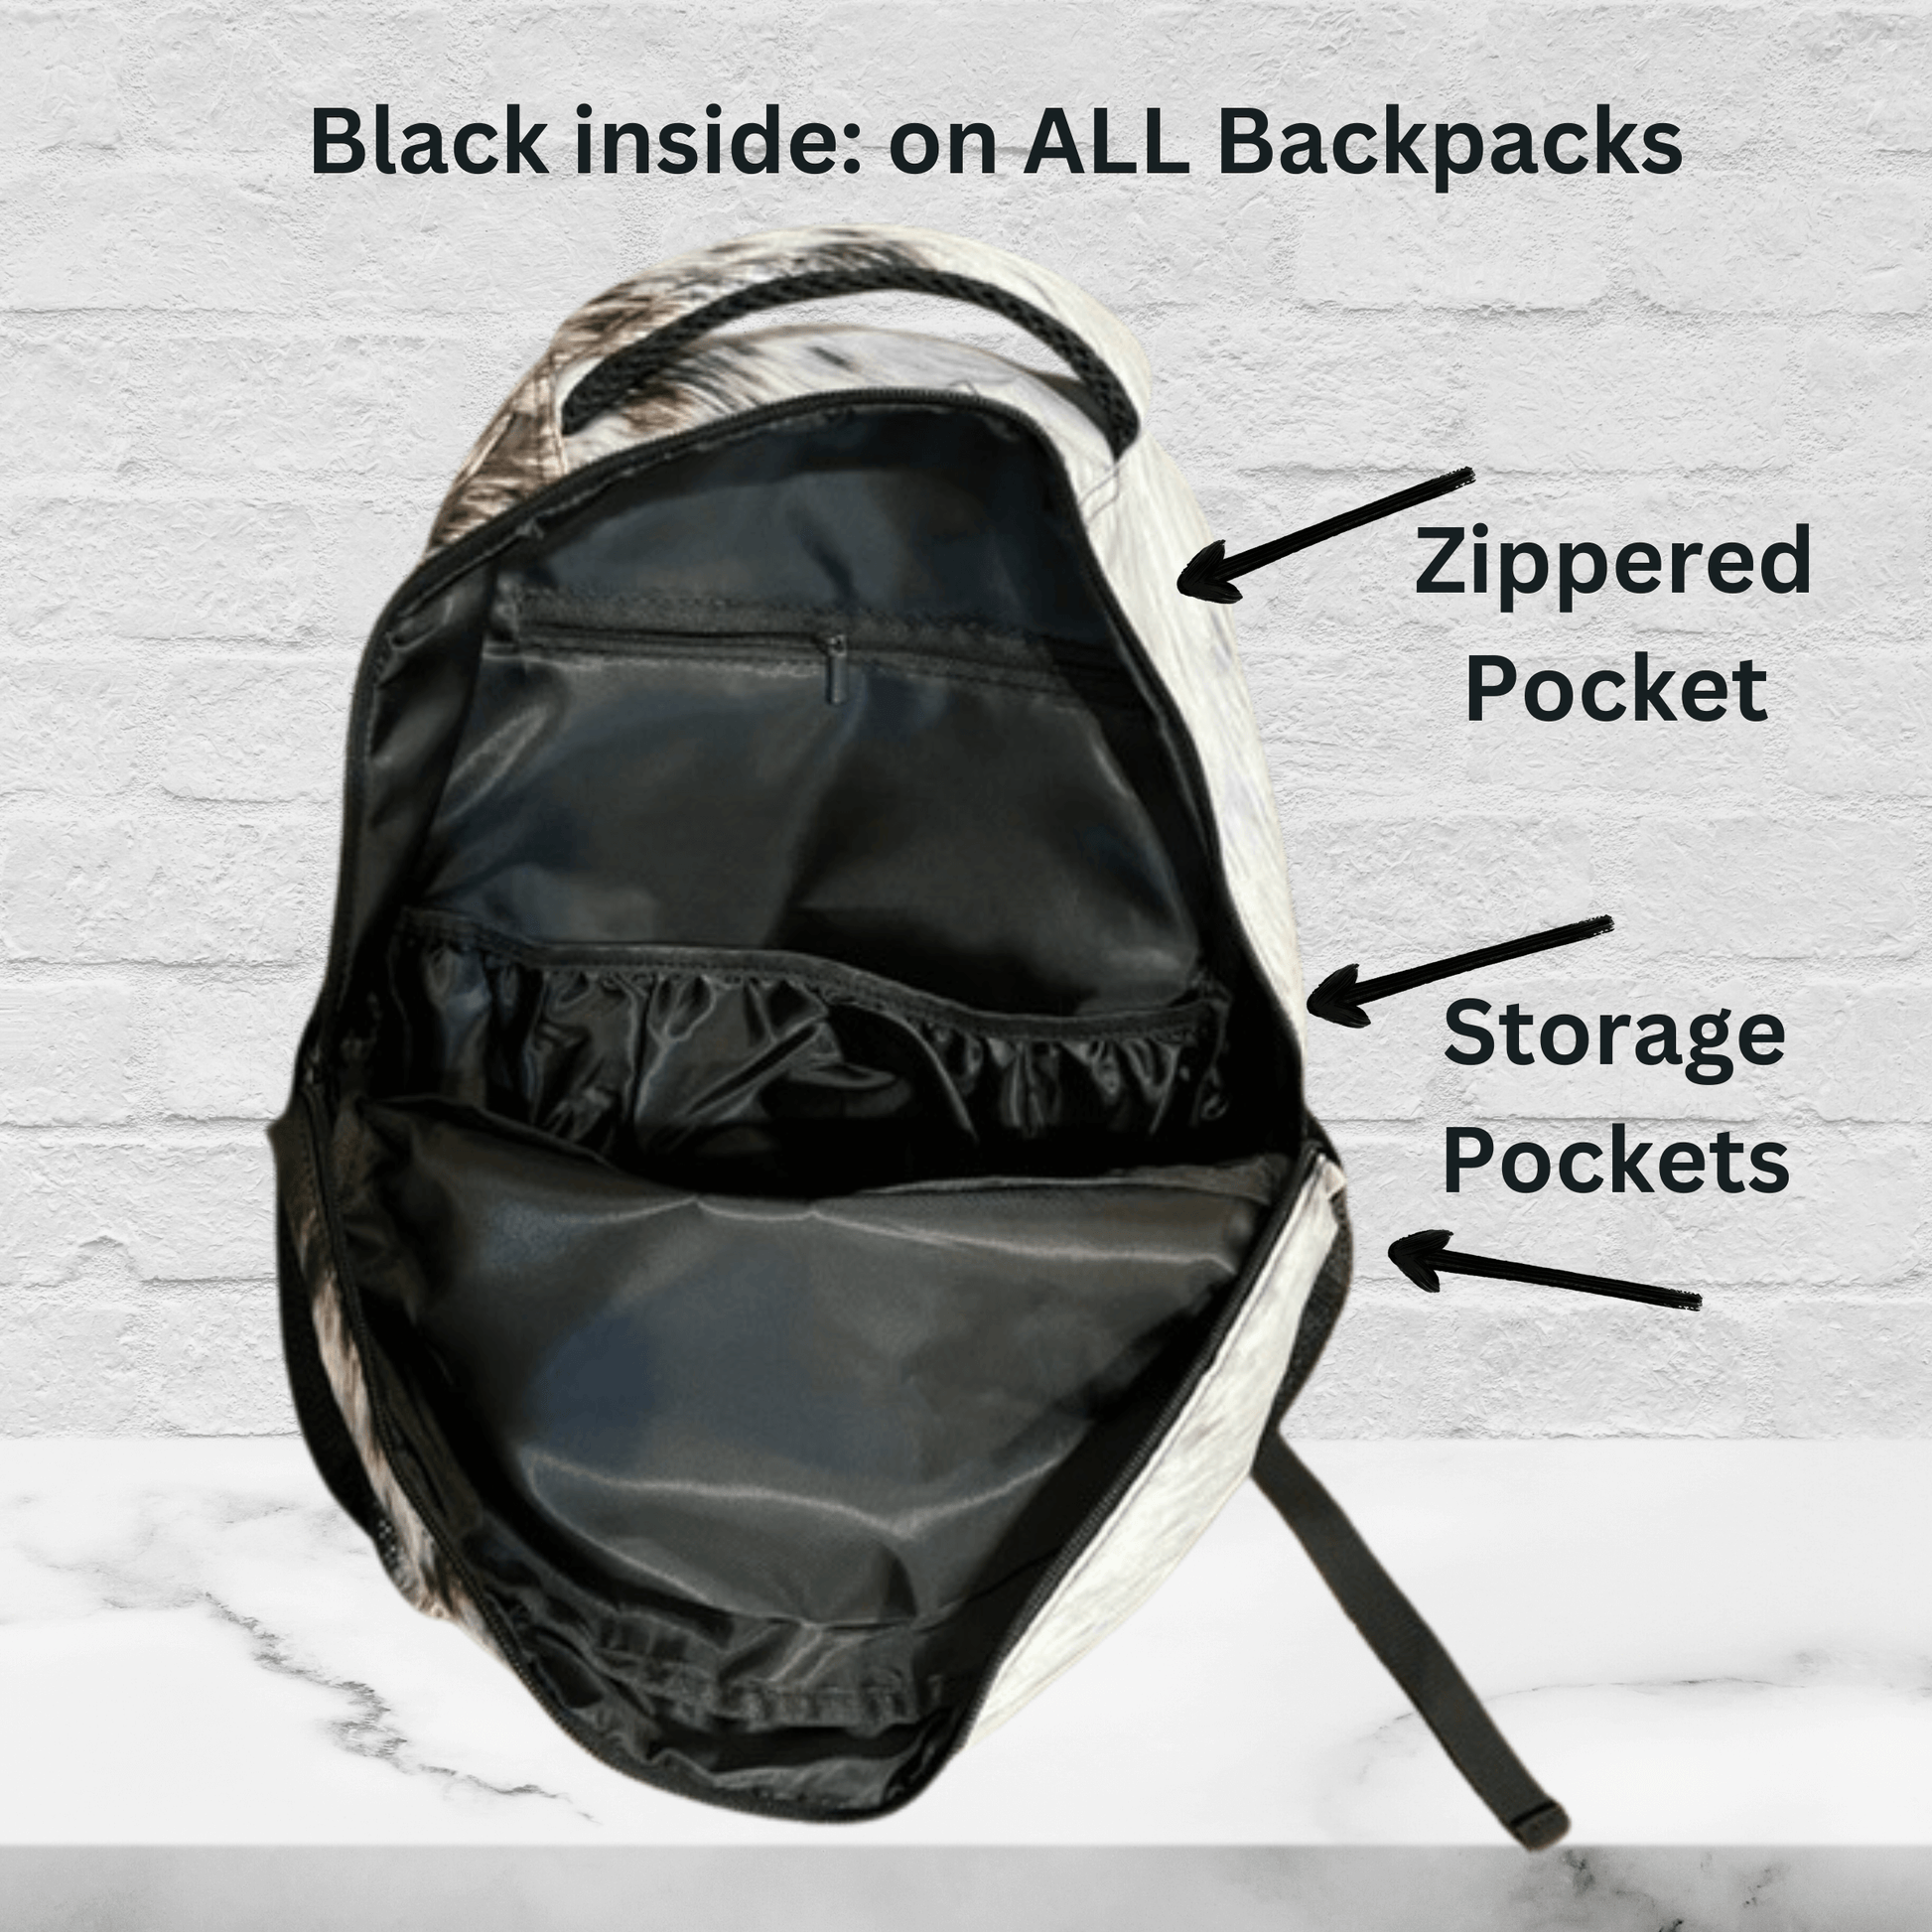 The inside of all our school backpacks are black with a zippered pocket and additional storage pockets.